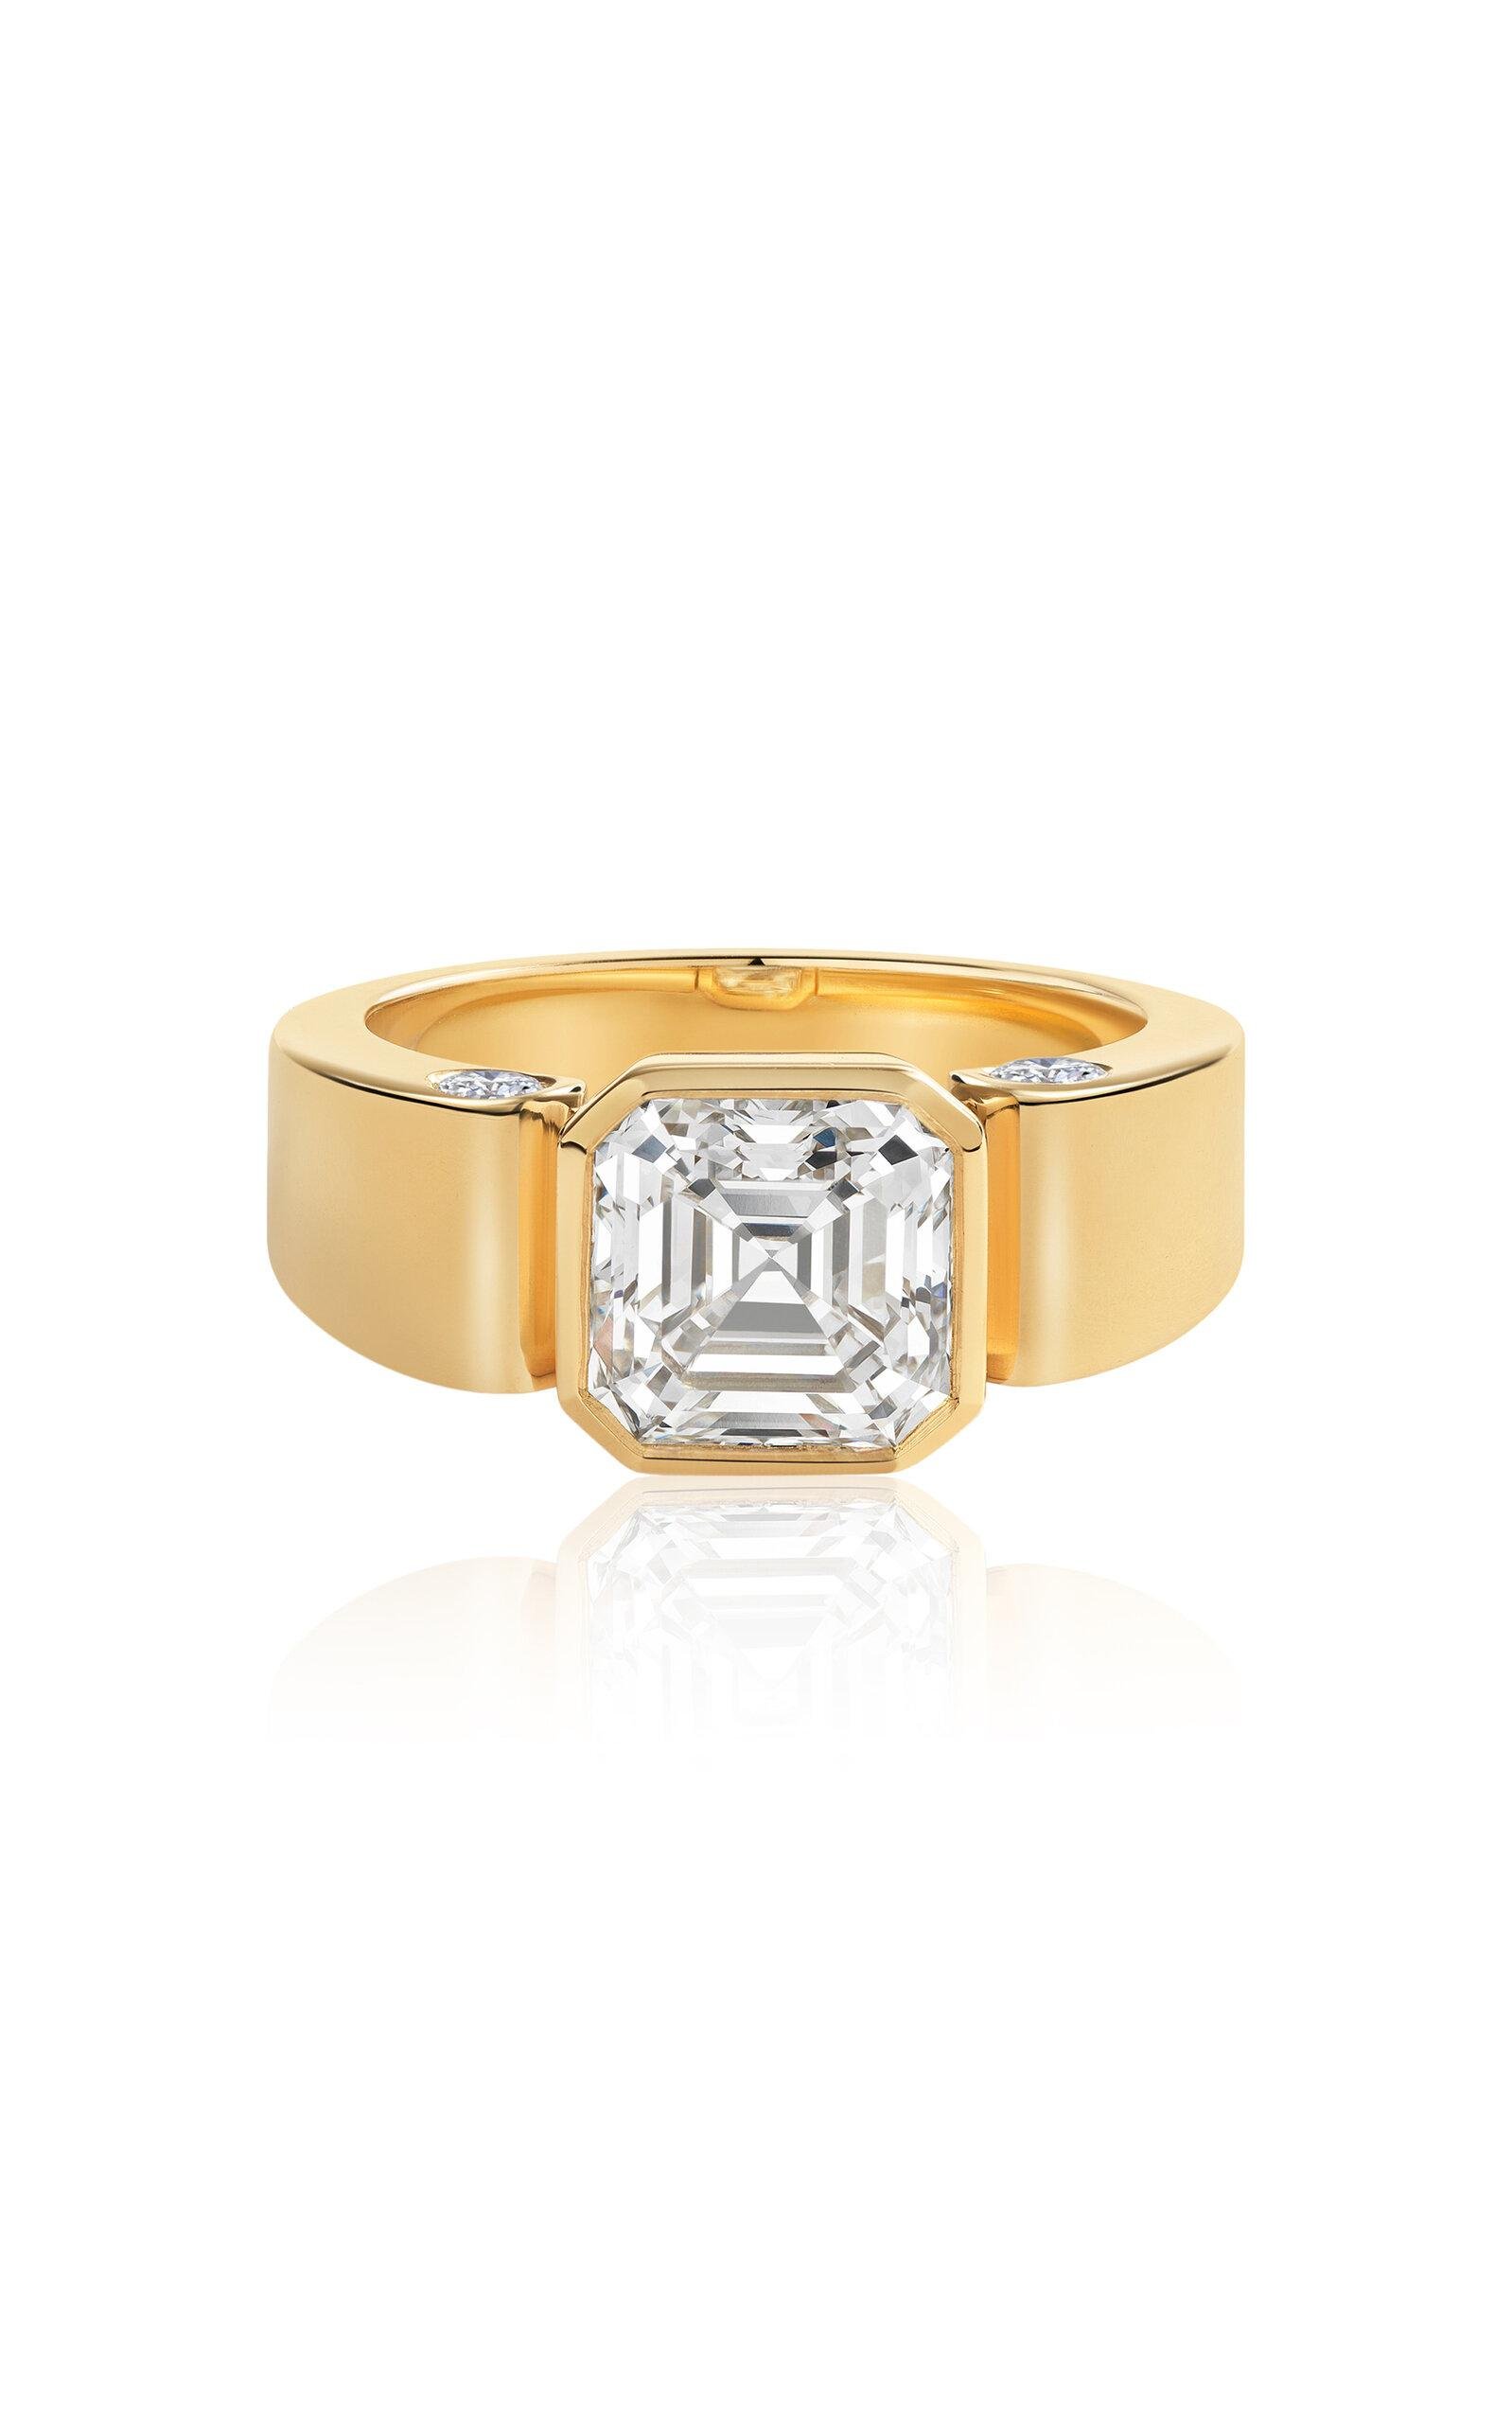 Erede - 18k Yellow Gold Axle Diamond Ring - Gold - US 8 - Only At Moda Operandi - Gifts For Her by EREDE